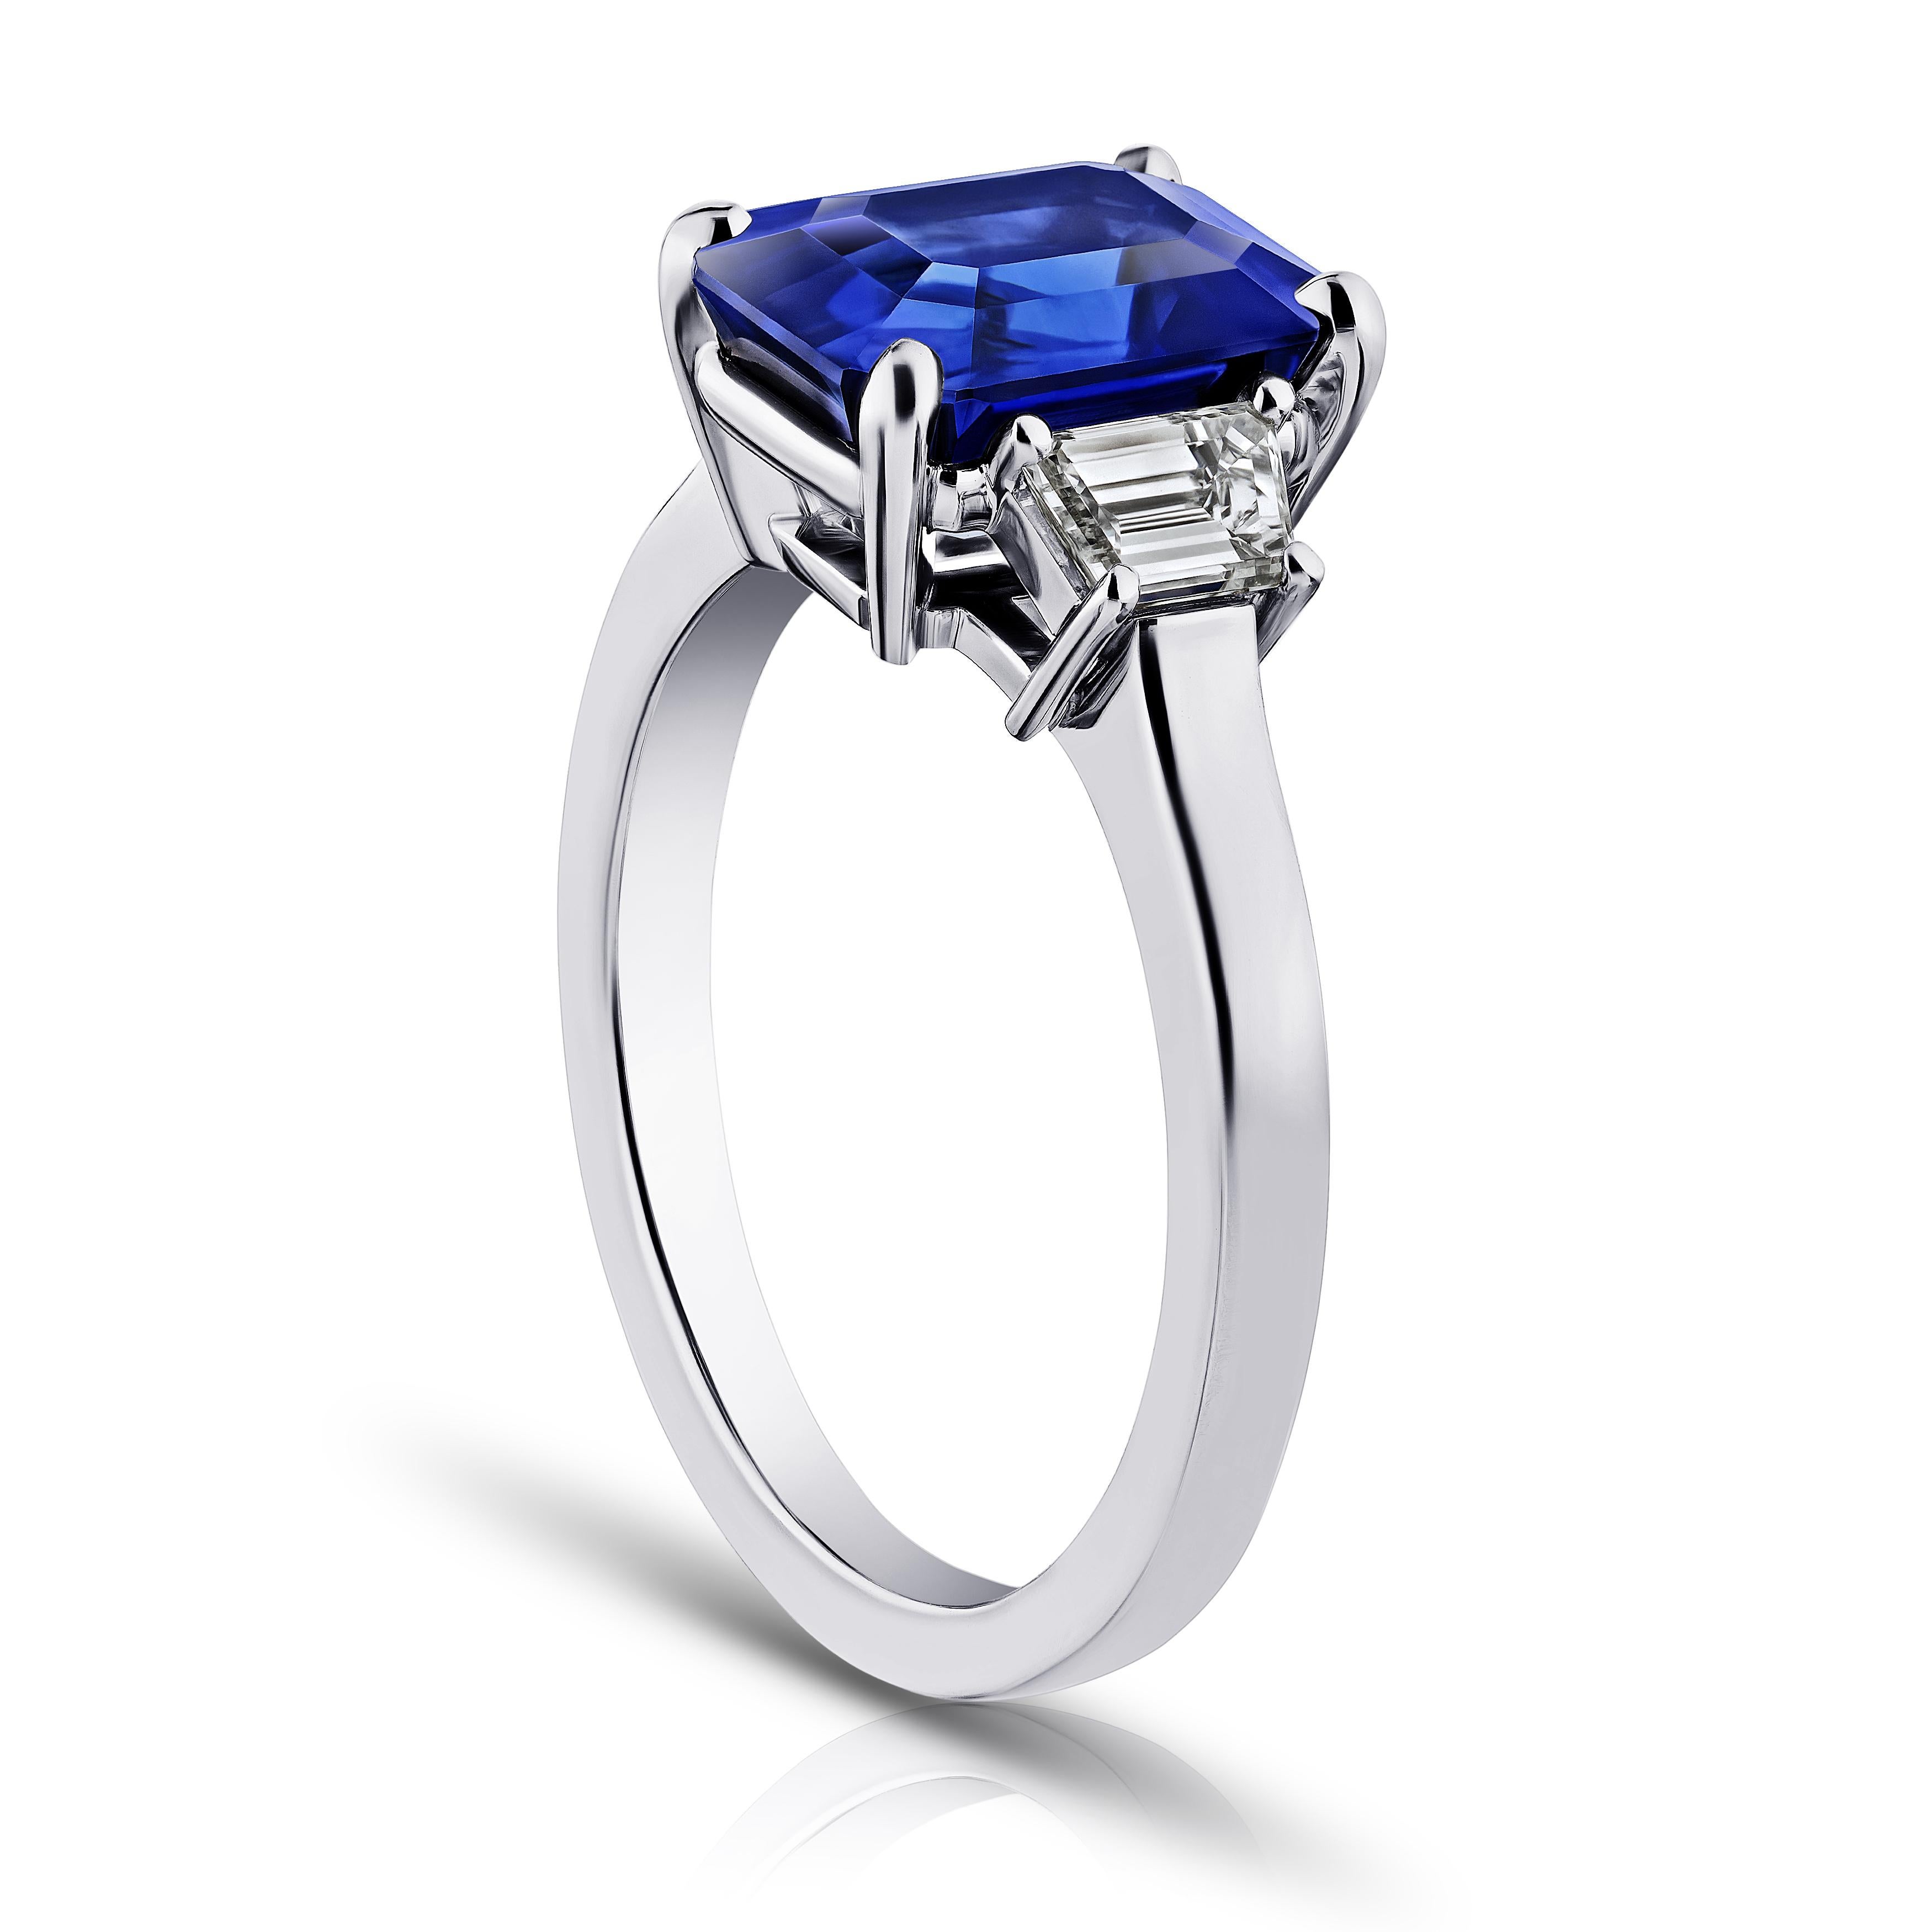 4.01 carat emerald cut blue sapphire with trapezoid diamonds .57 carats set in a platinum ring. Size 7. Free resizing included to your finger size.  